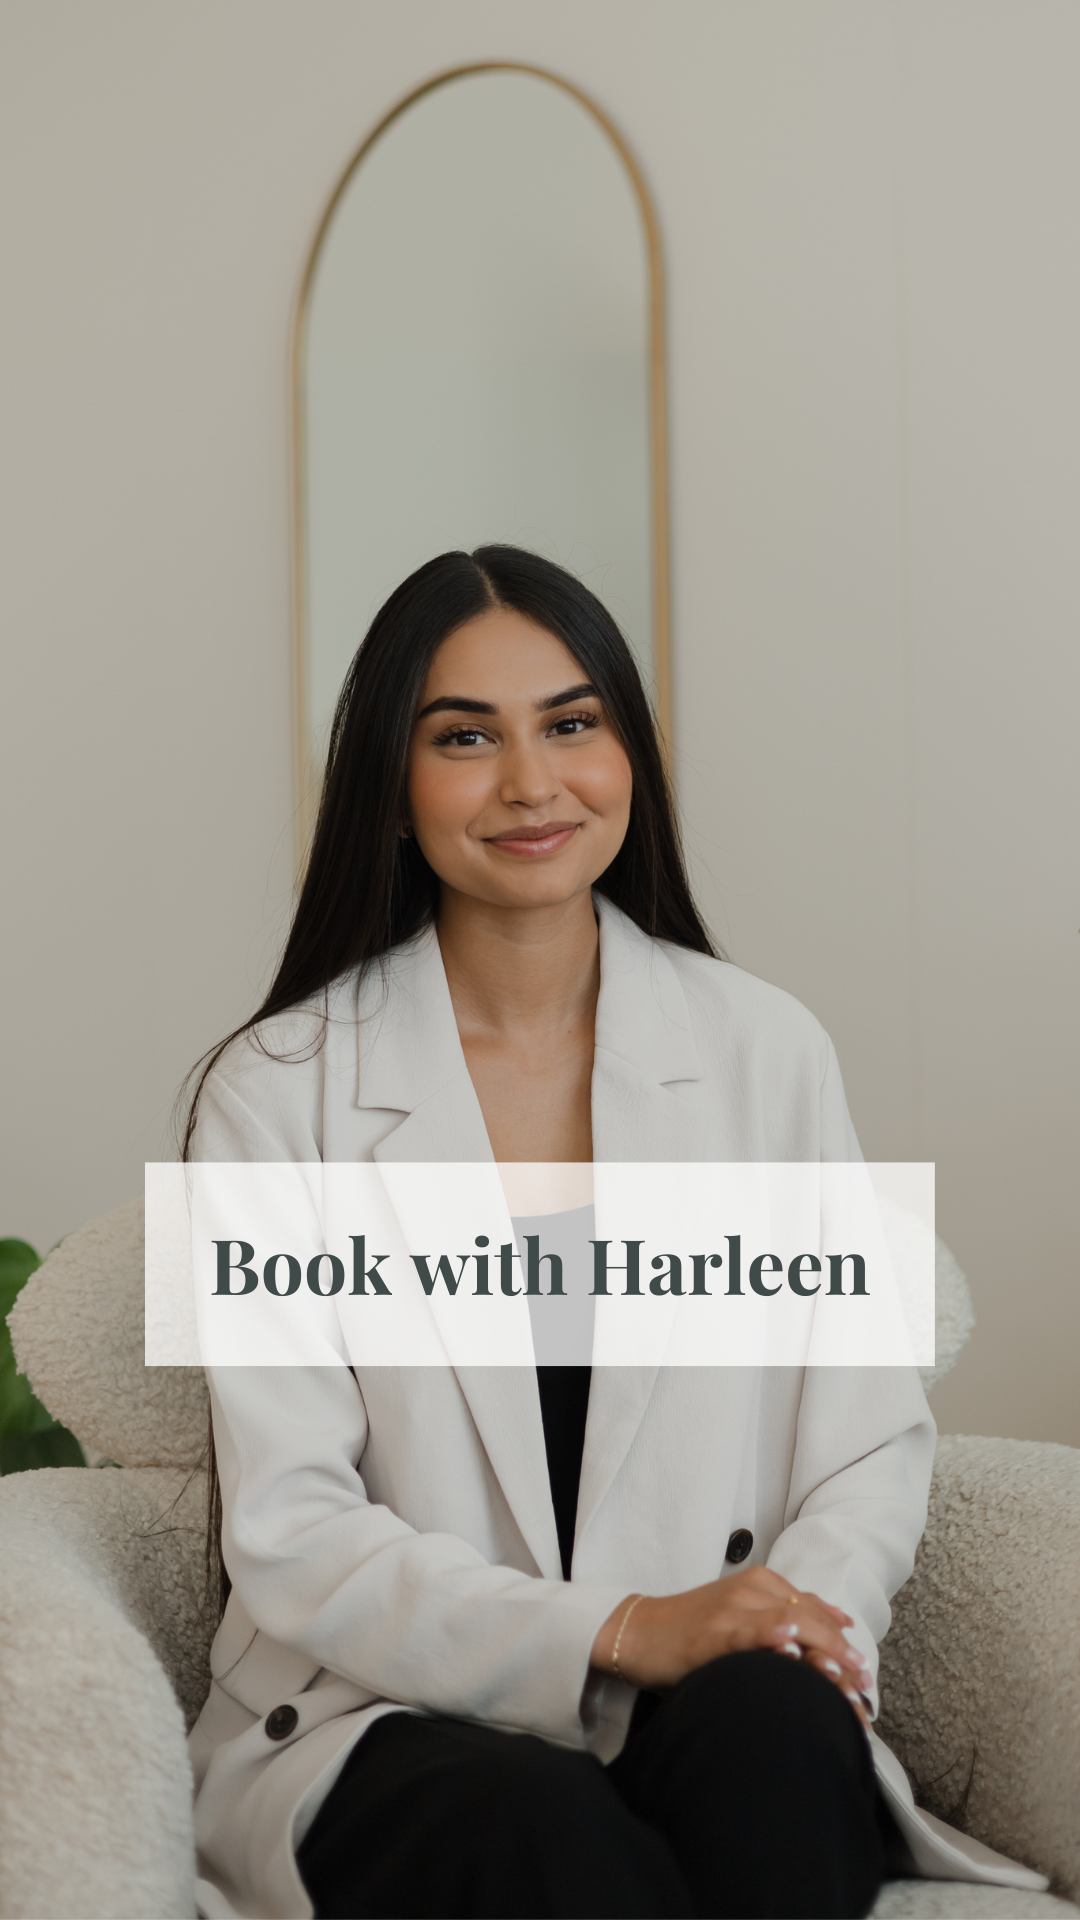 Harleen Sanghera, experienced registered provisional psychologist at Attached Counselling Co. in Calgary, click to book your appointment now.